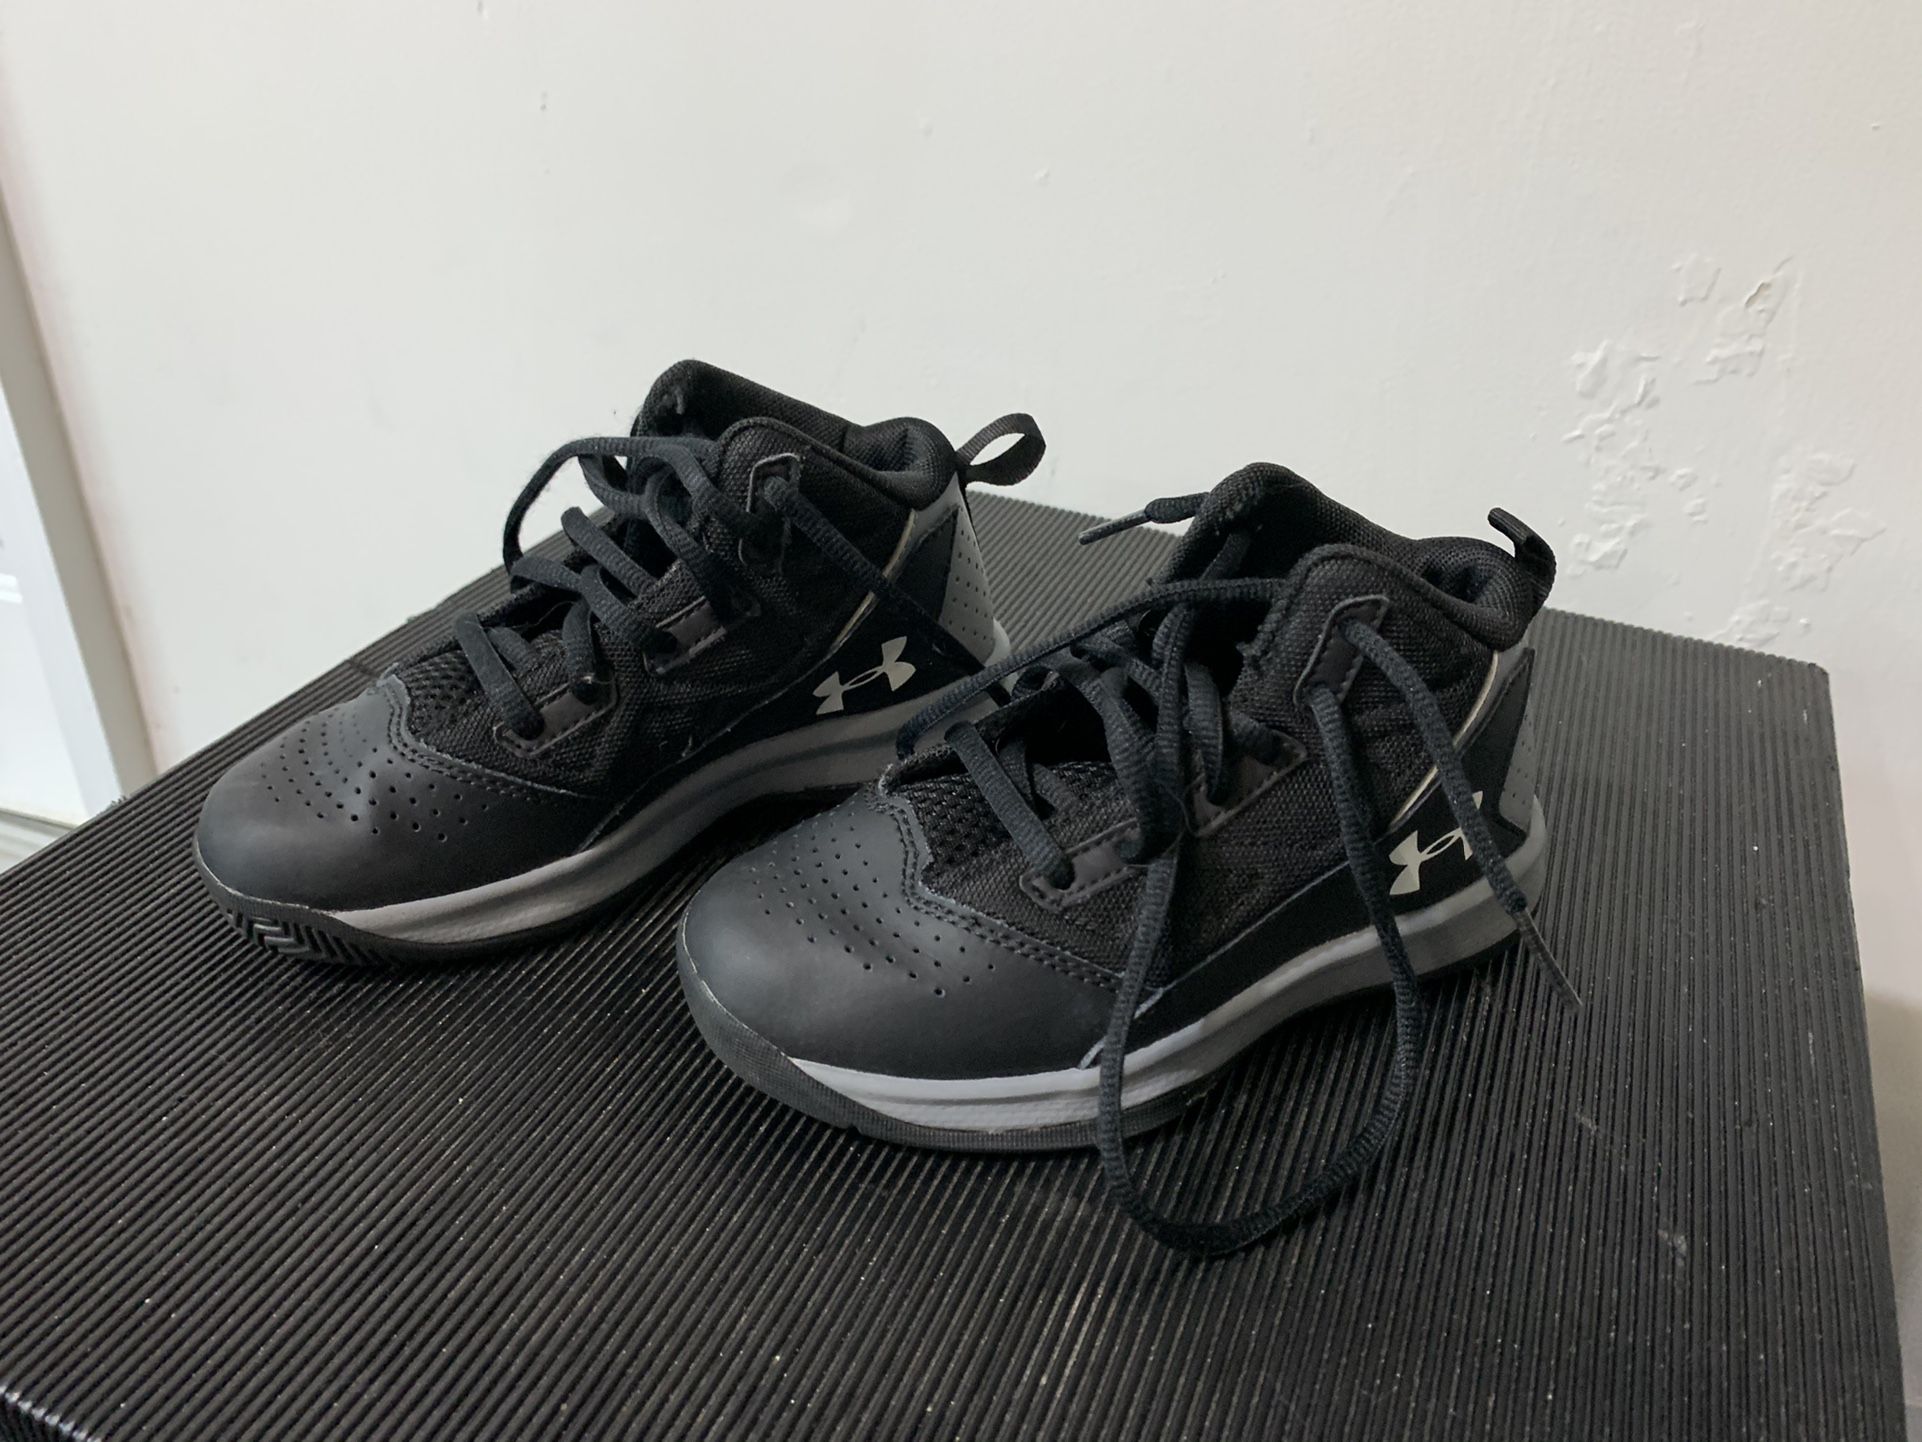 Under Armour Basketball Shoes - 11K - $10